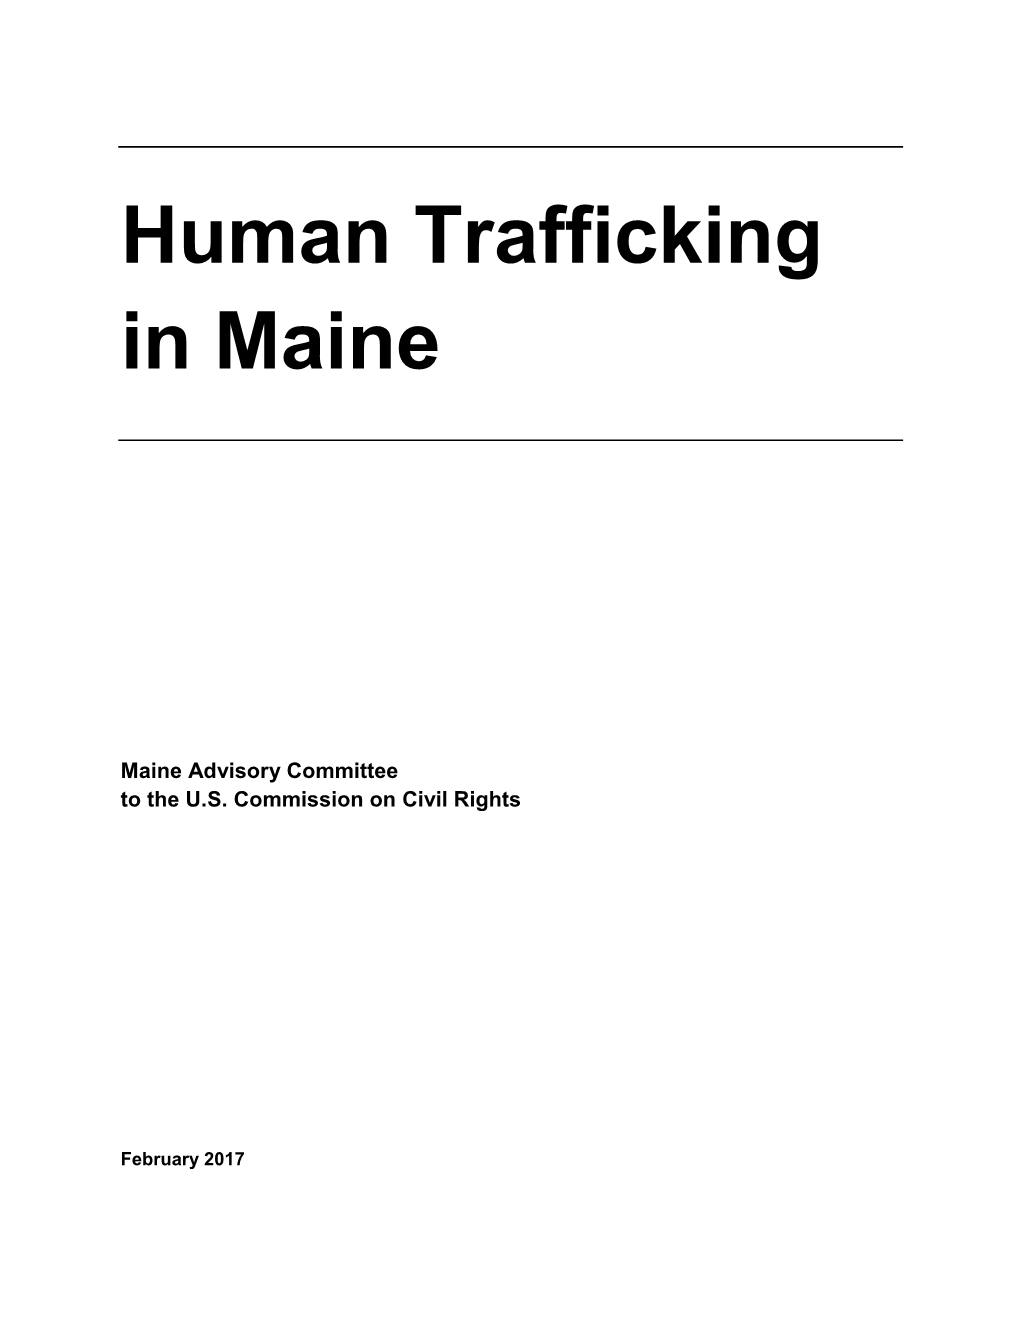 Human Trafficking in Maine